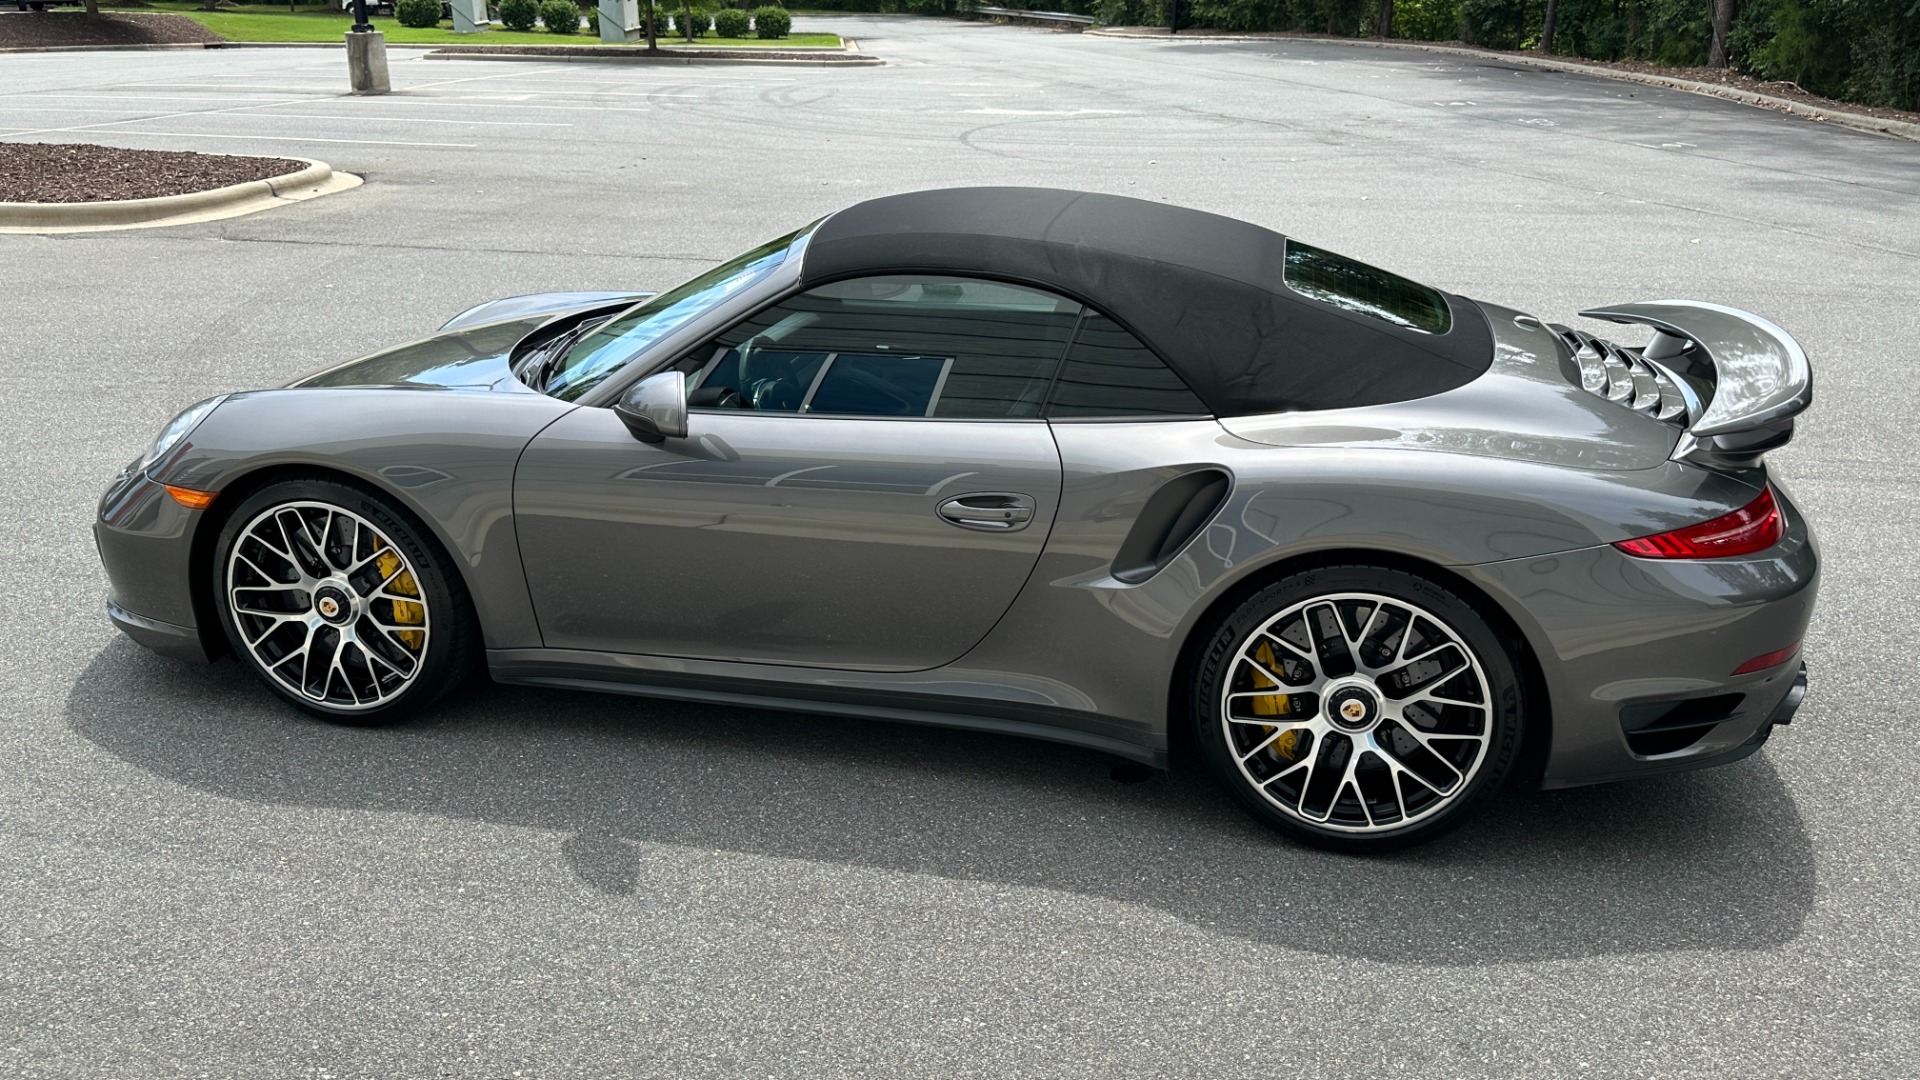 Used 2015 Porsche 911 TURBO S / BYDESIGN STAGE 4.2 POWER PACKAGE / $30K IN UPGRADES / APPLE CARPL for sale $118,999 at Formula Imports in Charlotte NC 28227 6